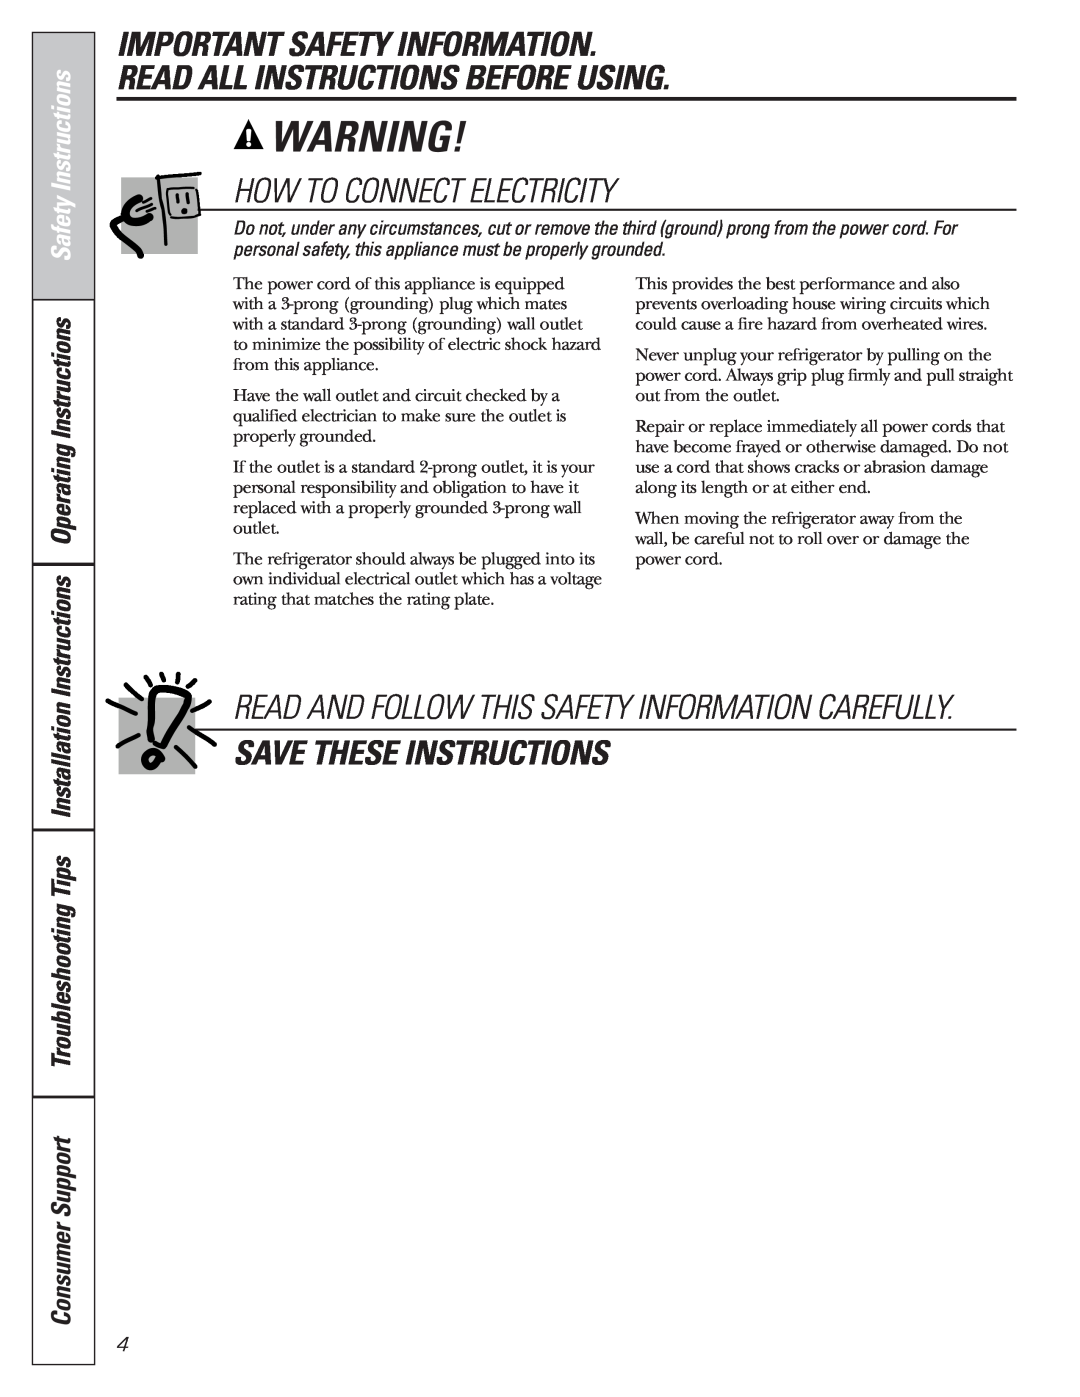 GE 200D8074P017 How To Connect Electricity, Save These Instructions, Instructions Operating Instructions 